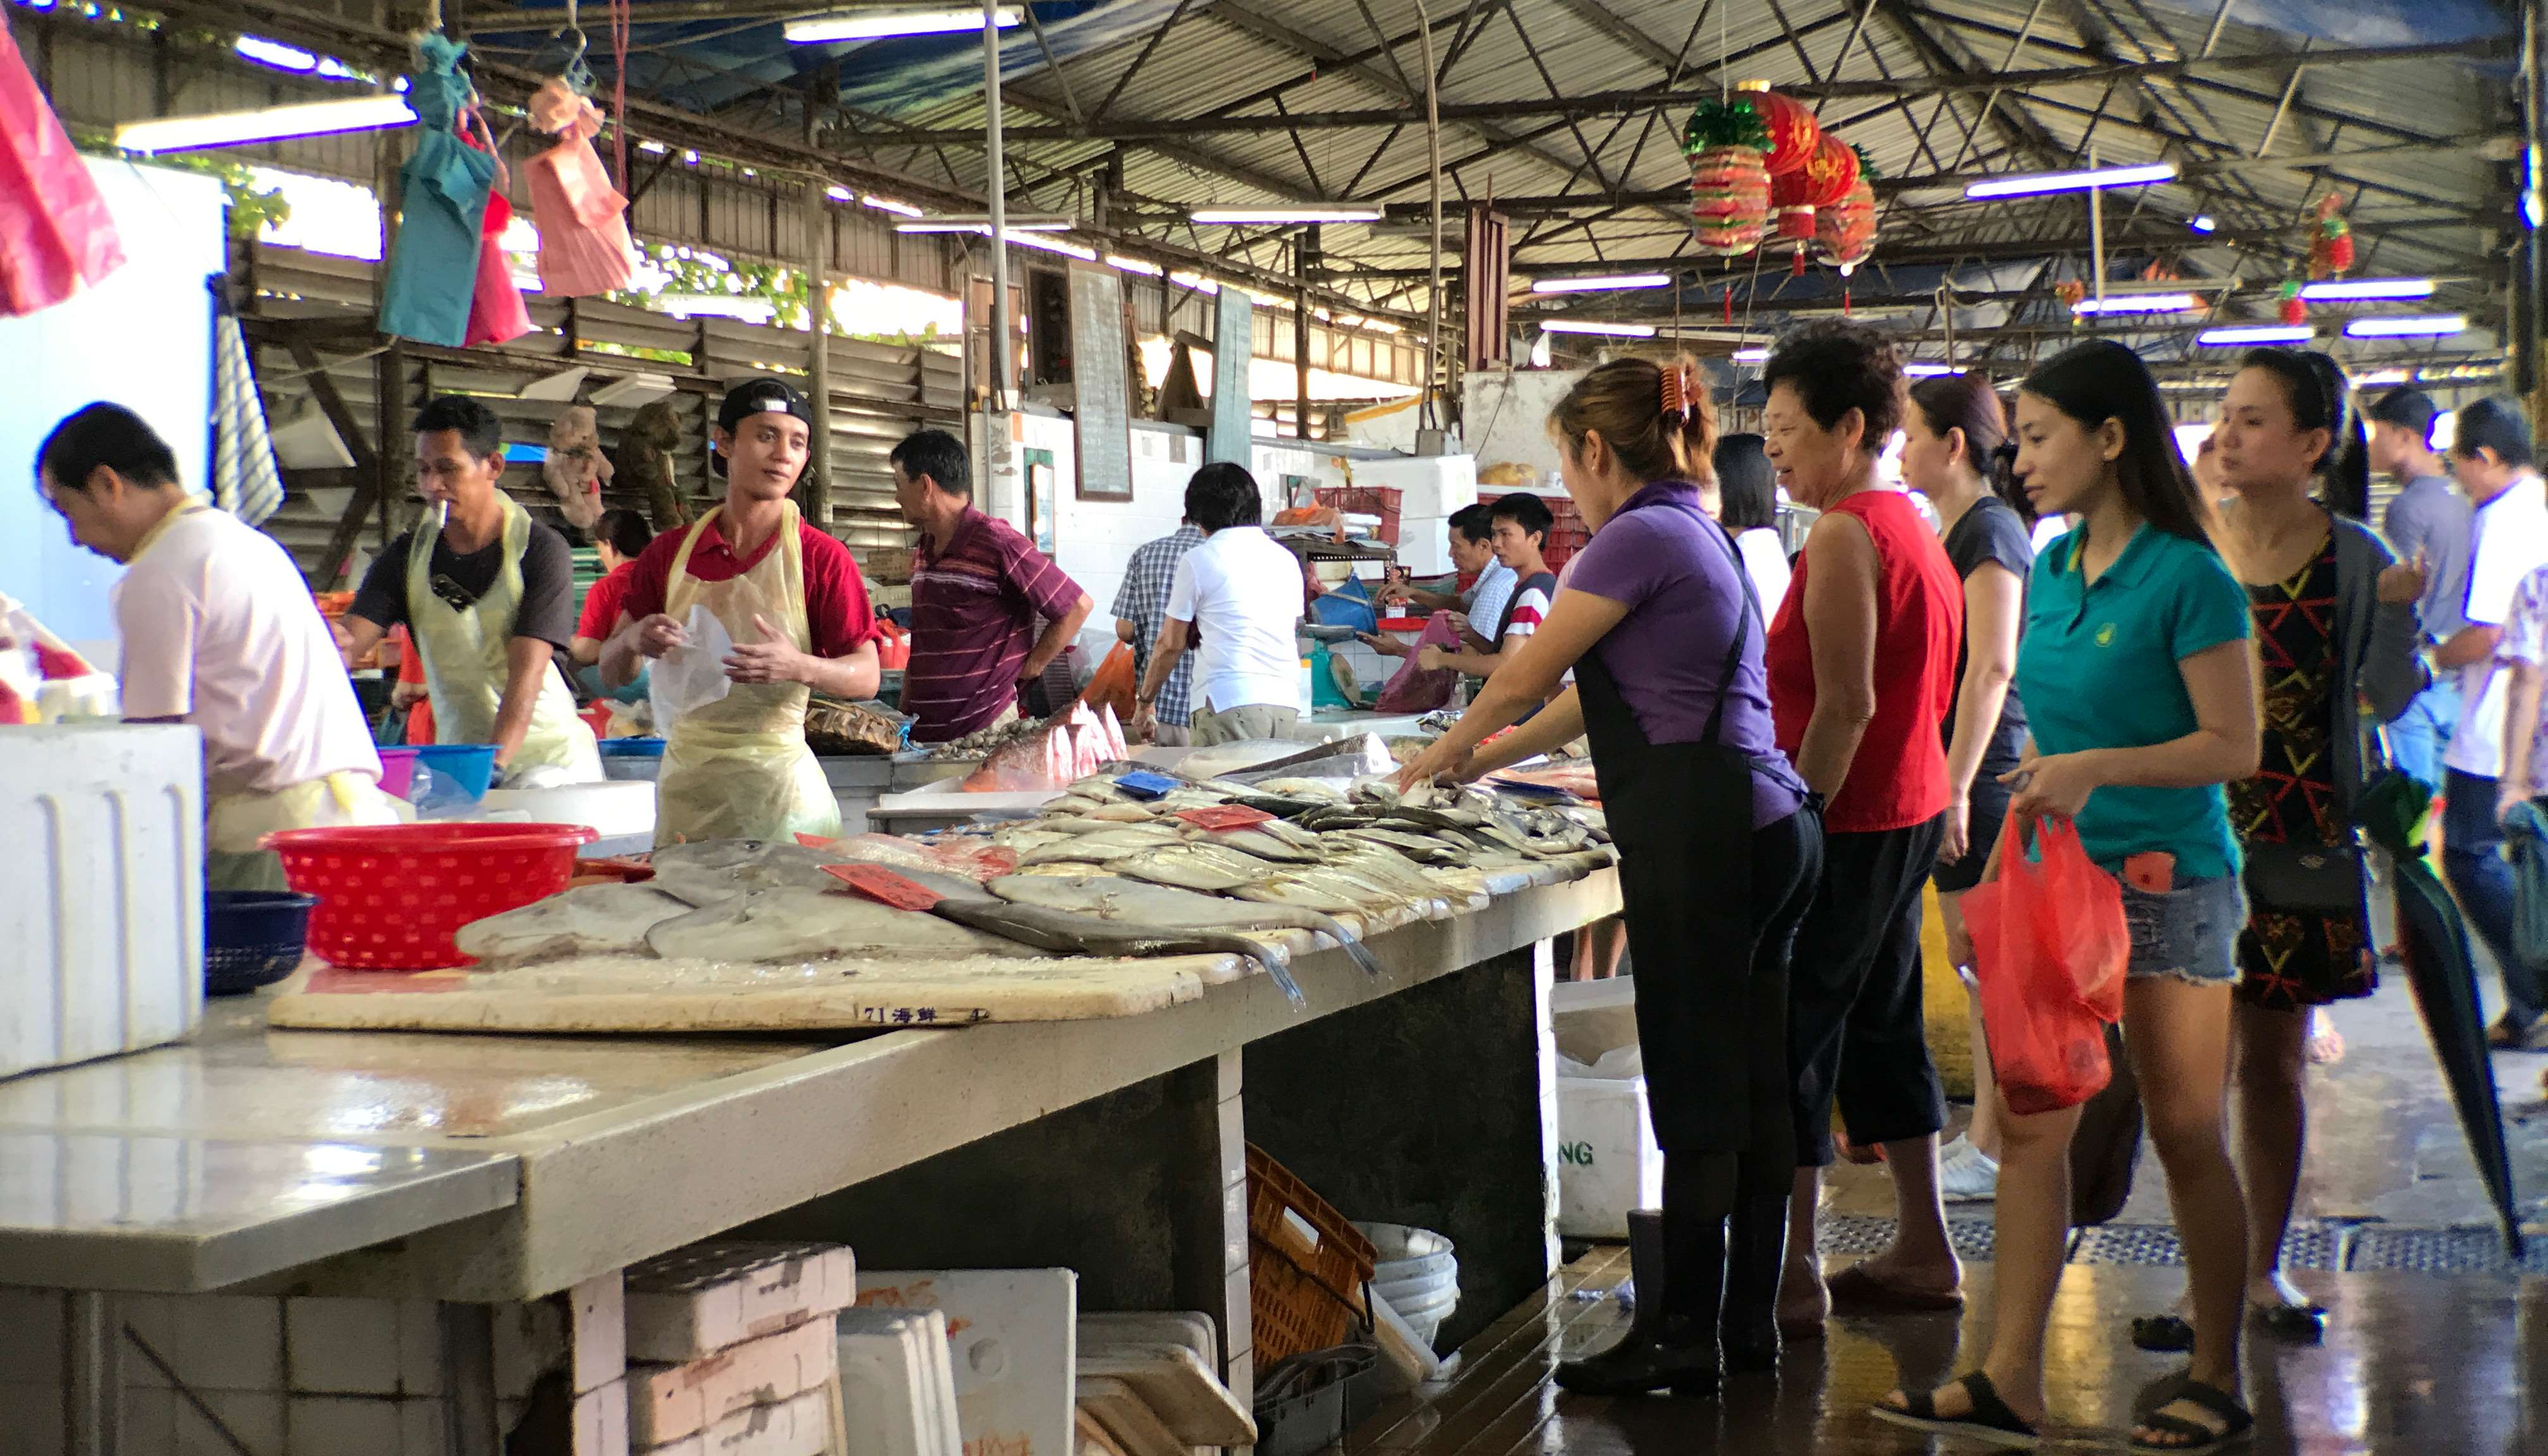 Read At the Wet Market with Mother by Kin Mun "mrbrown" Lee